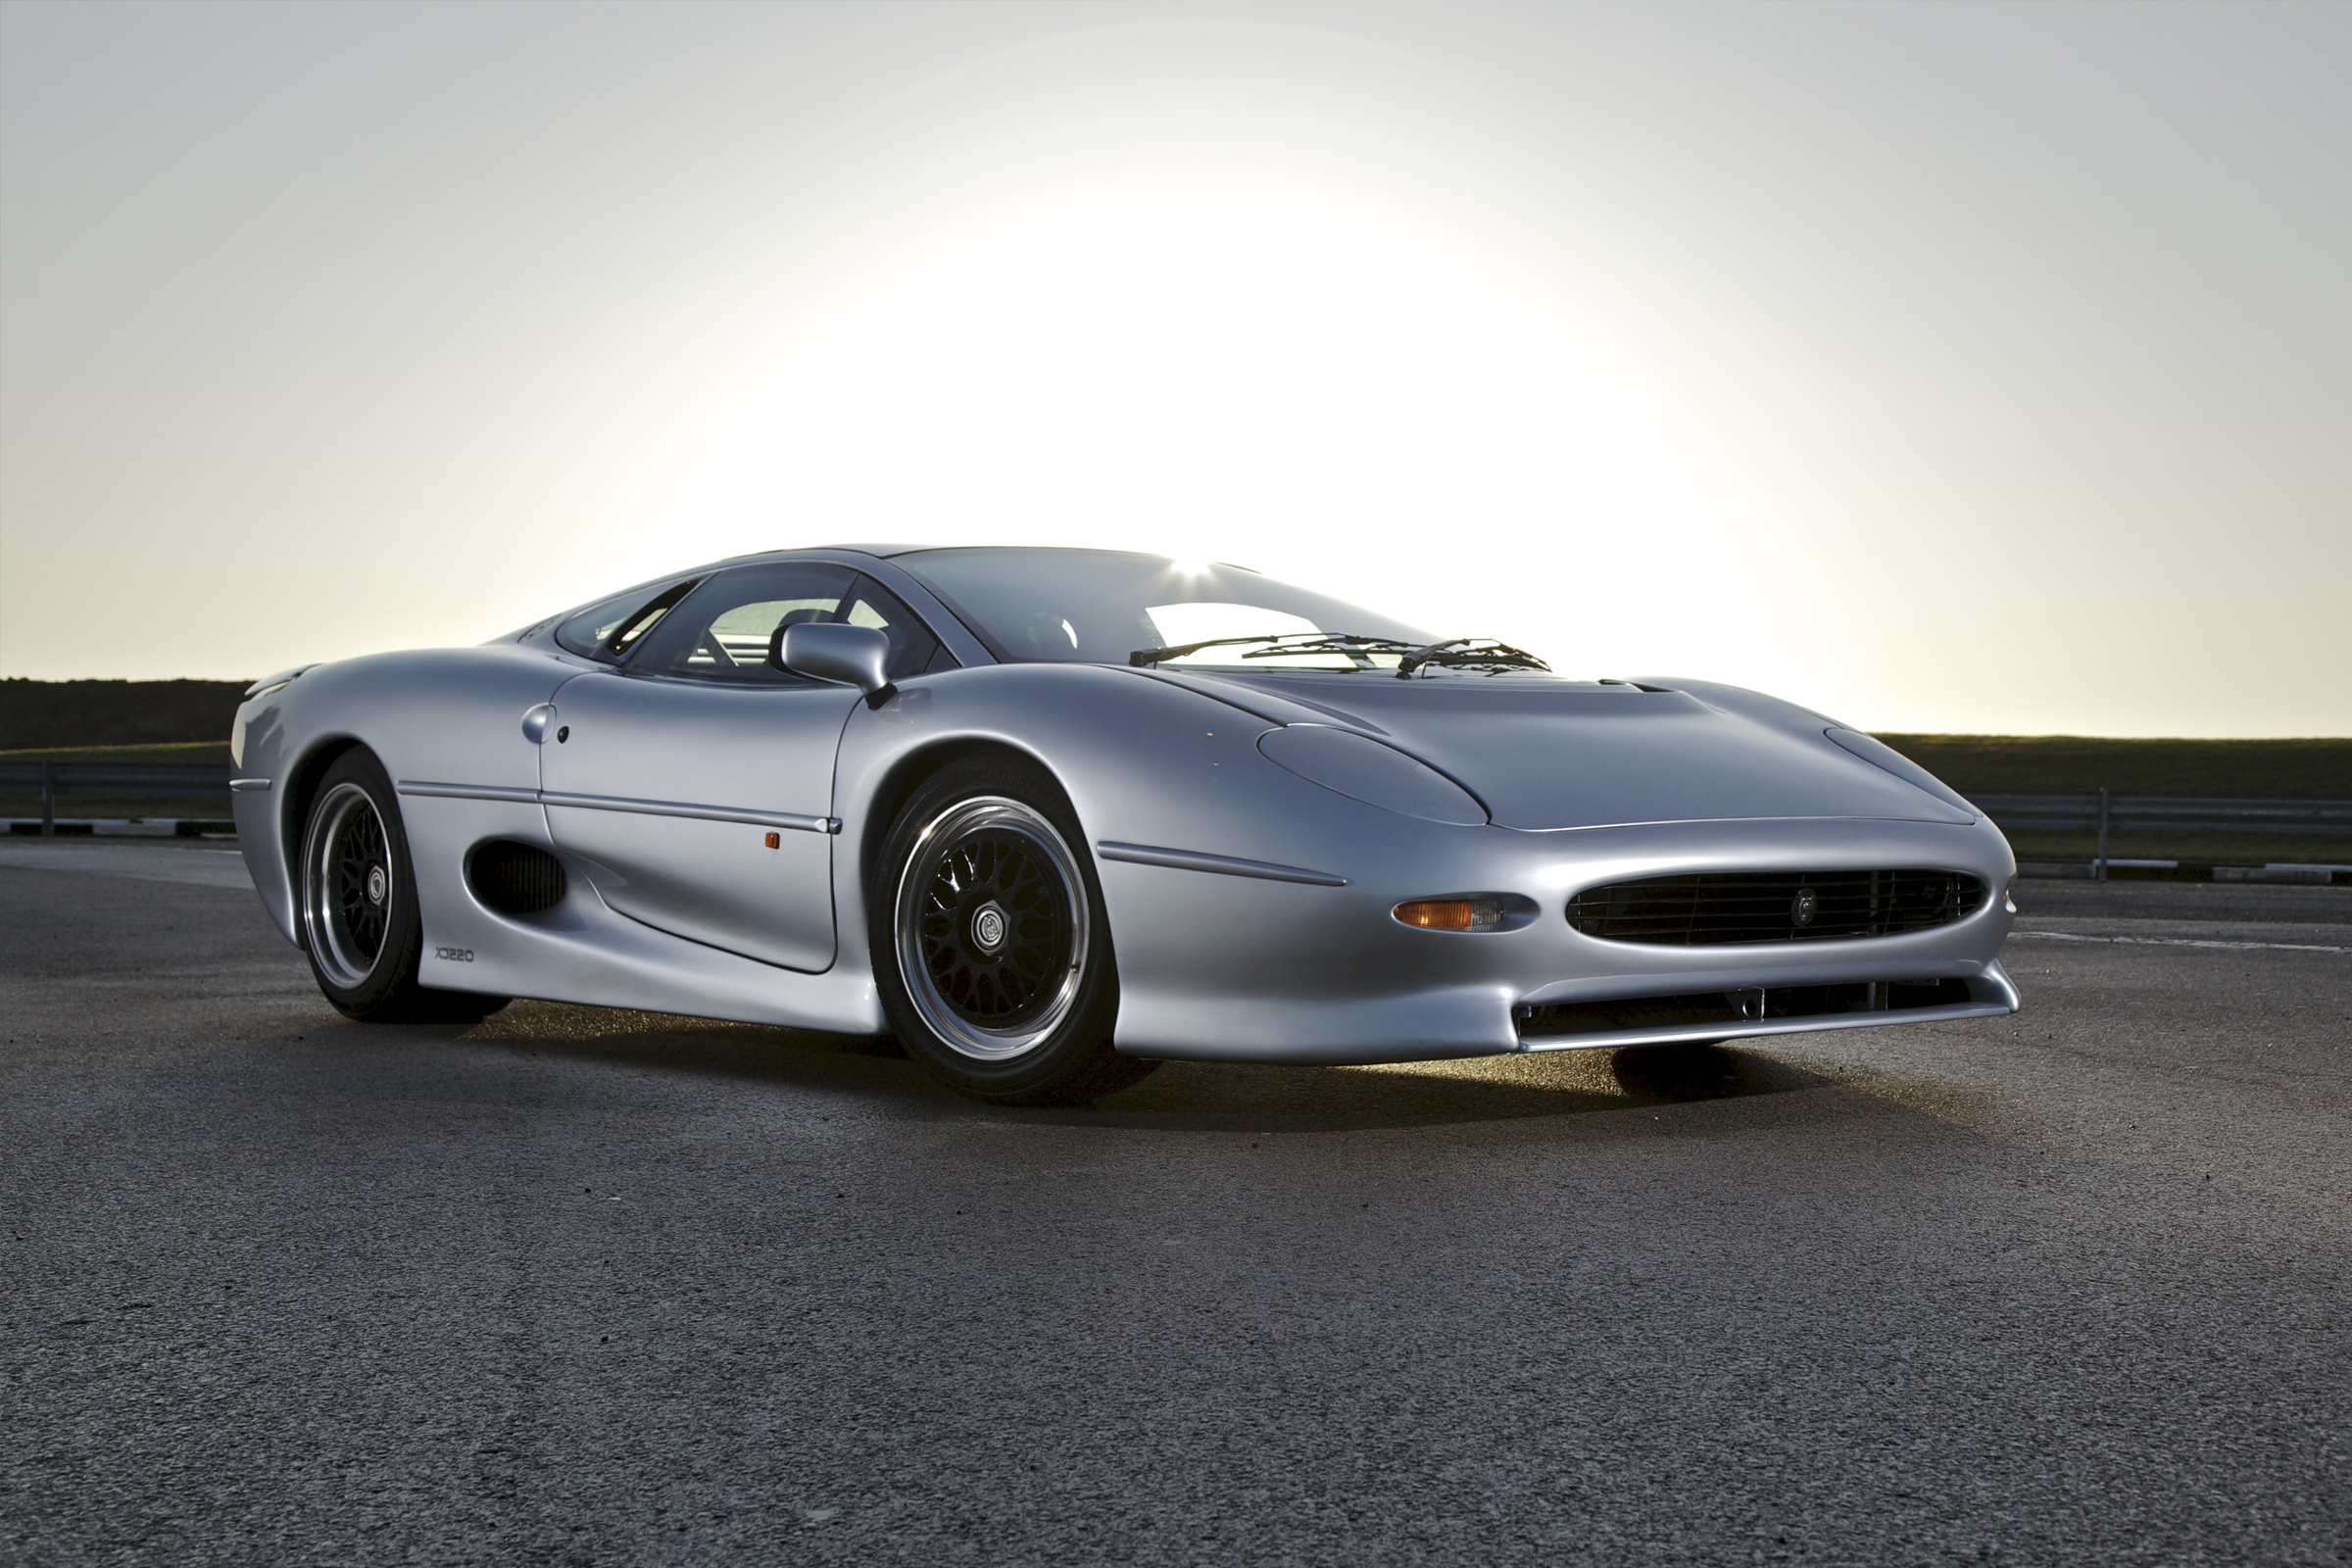 The 10 best Jaguar cars of all time | evo